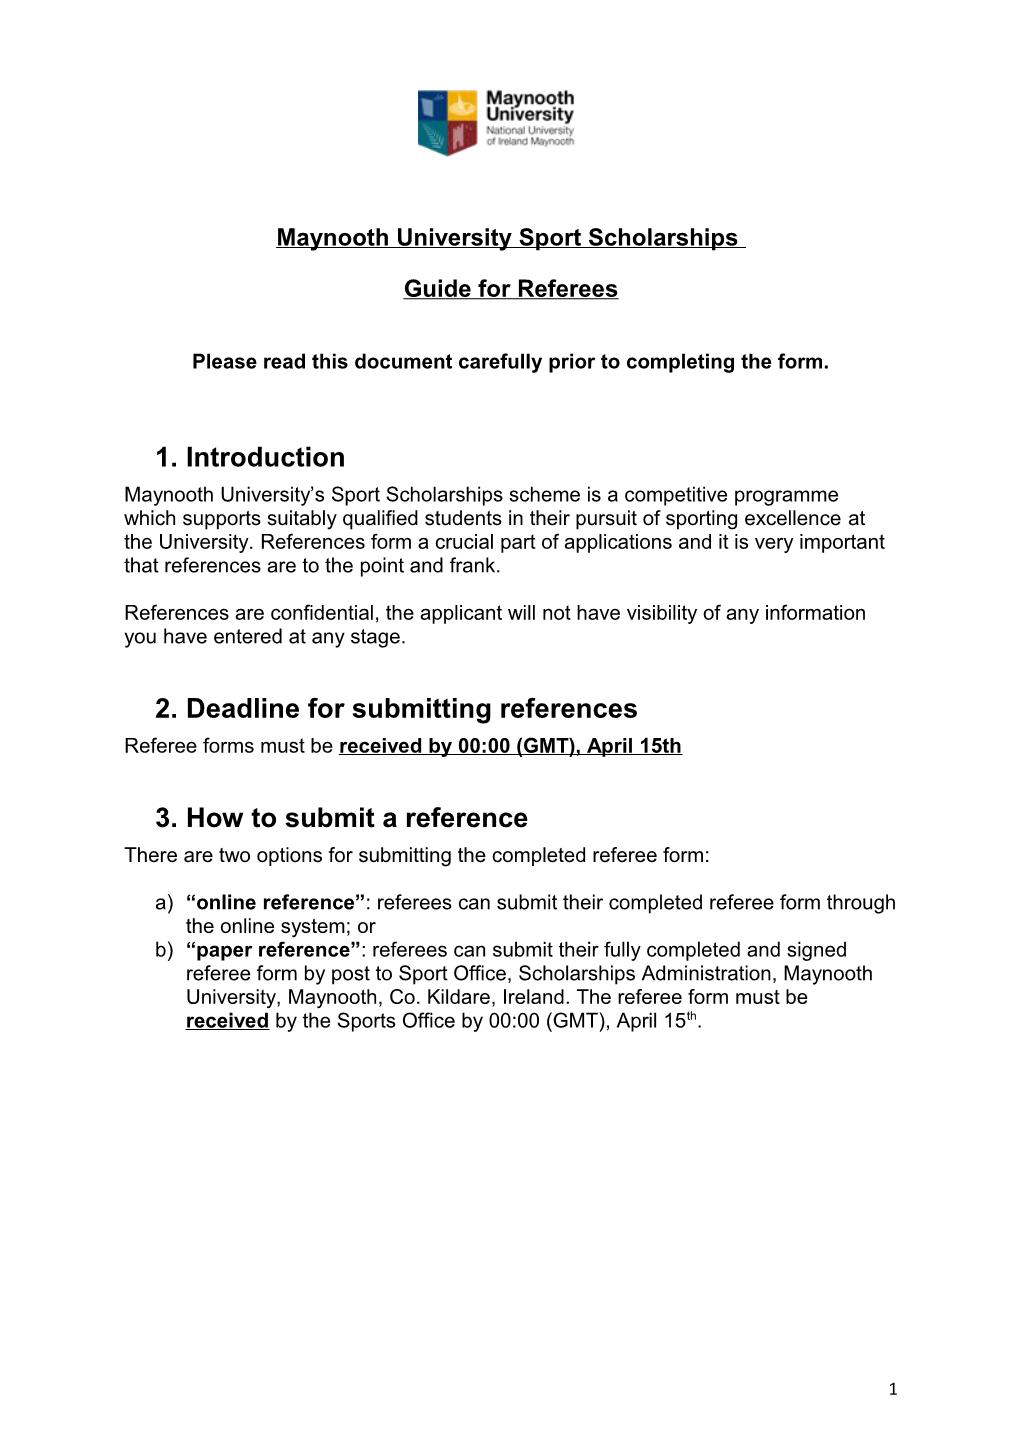 Maynooth Universitysport Scholarships Guide for Referees